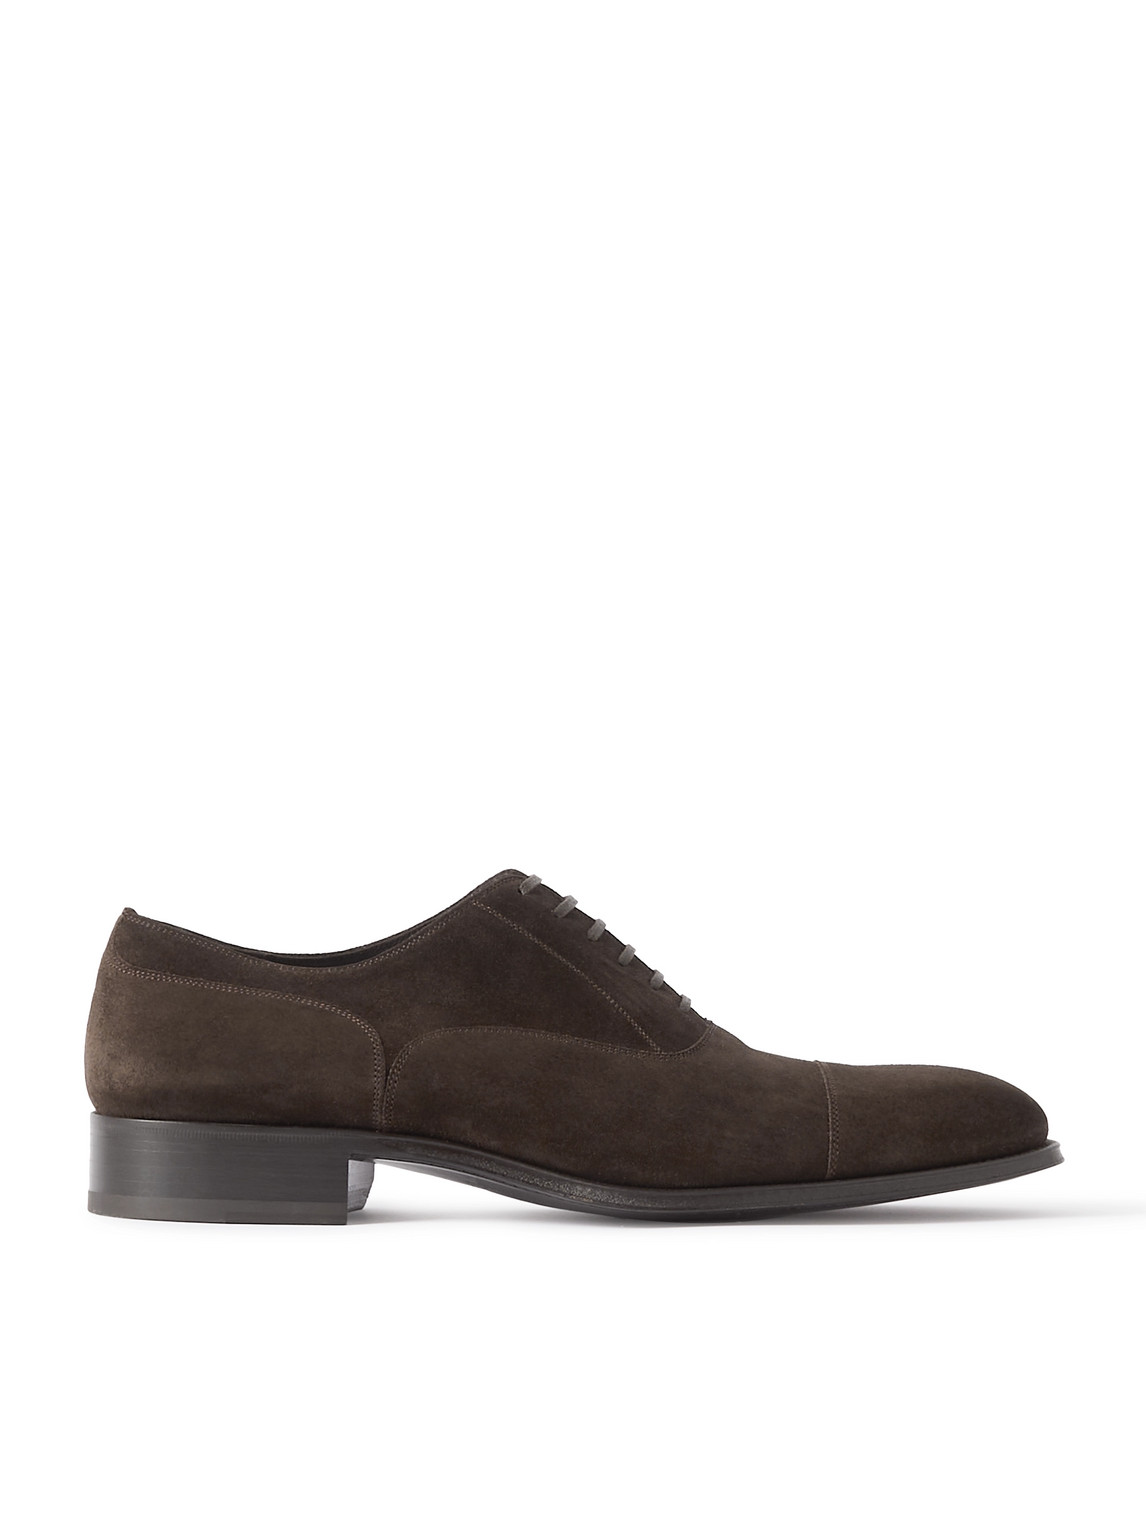 Tom Ford Claydon Suede Oxford Shoes In Brown